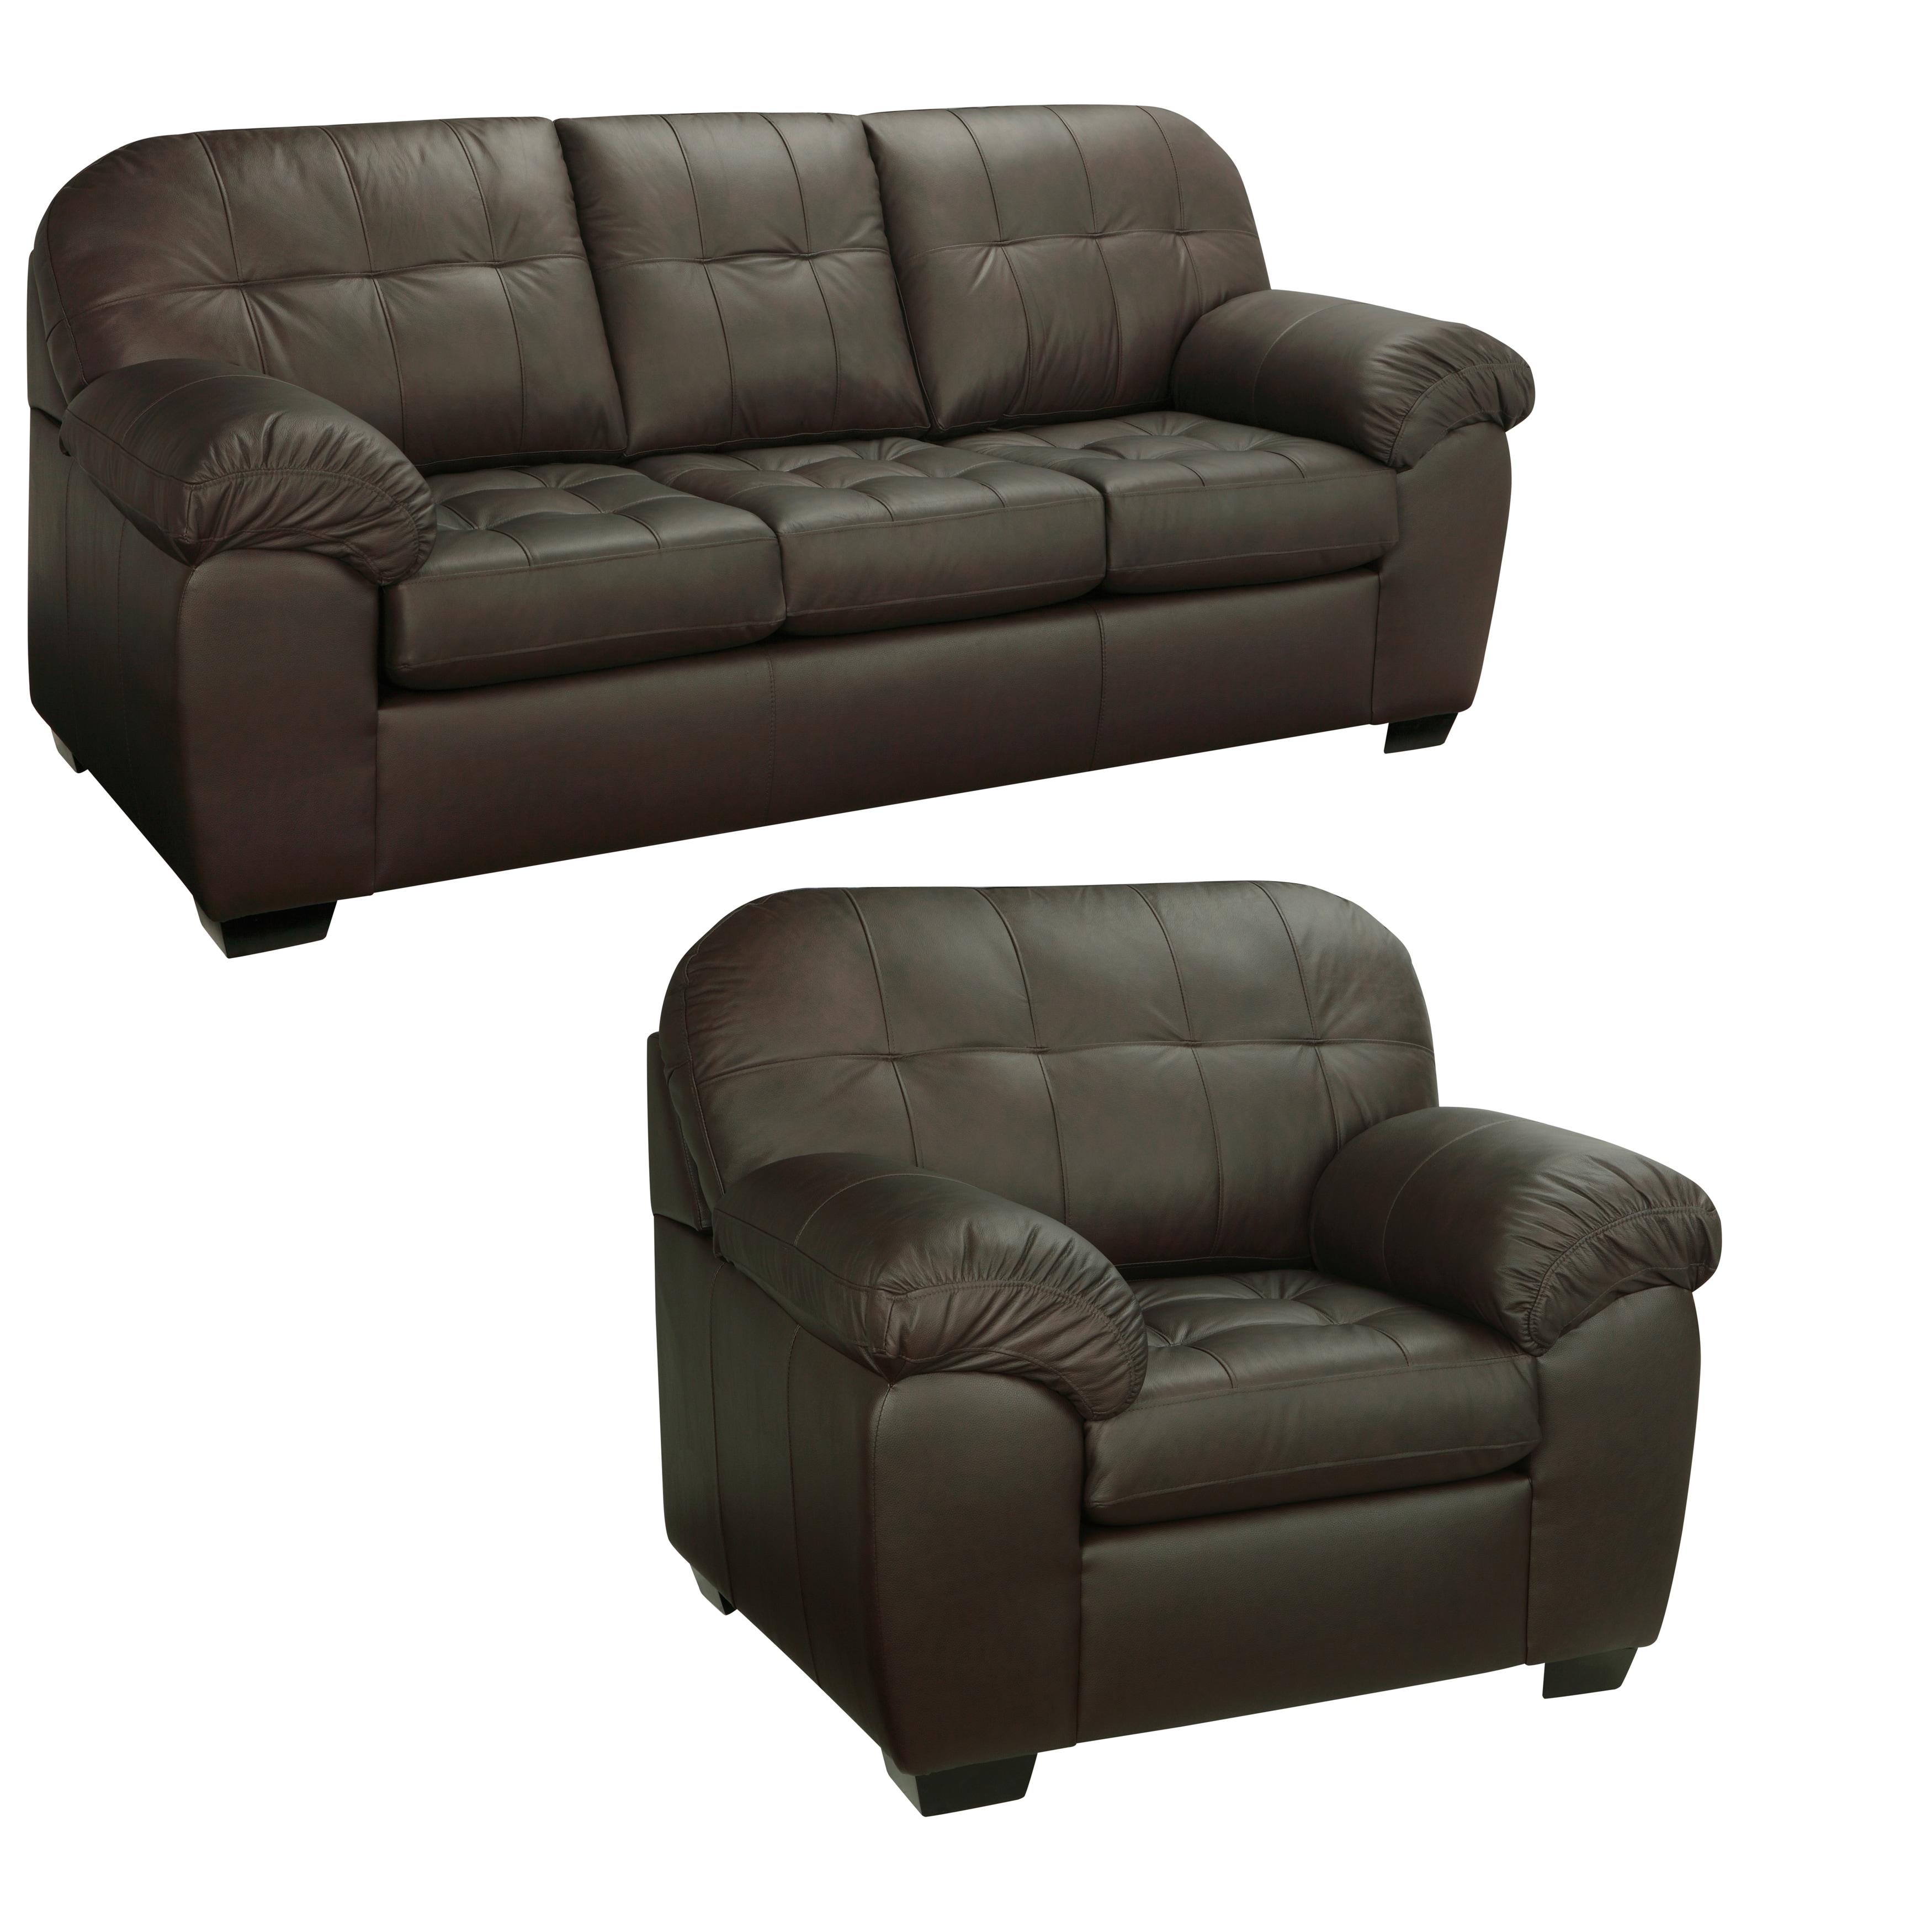 & - Leather and Chair Beyond Bath - Bed On Brown Sale Isabella 8093093 - Set Italian Sofa Chocolate